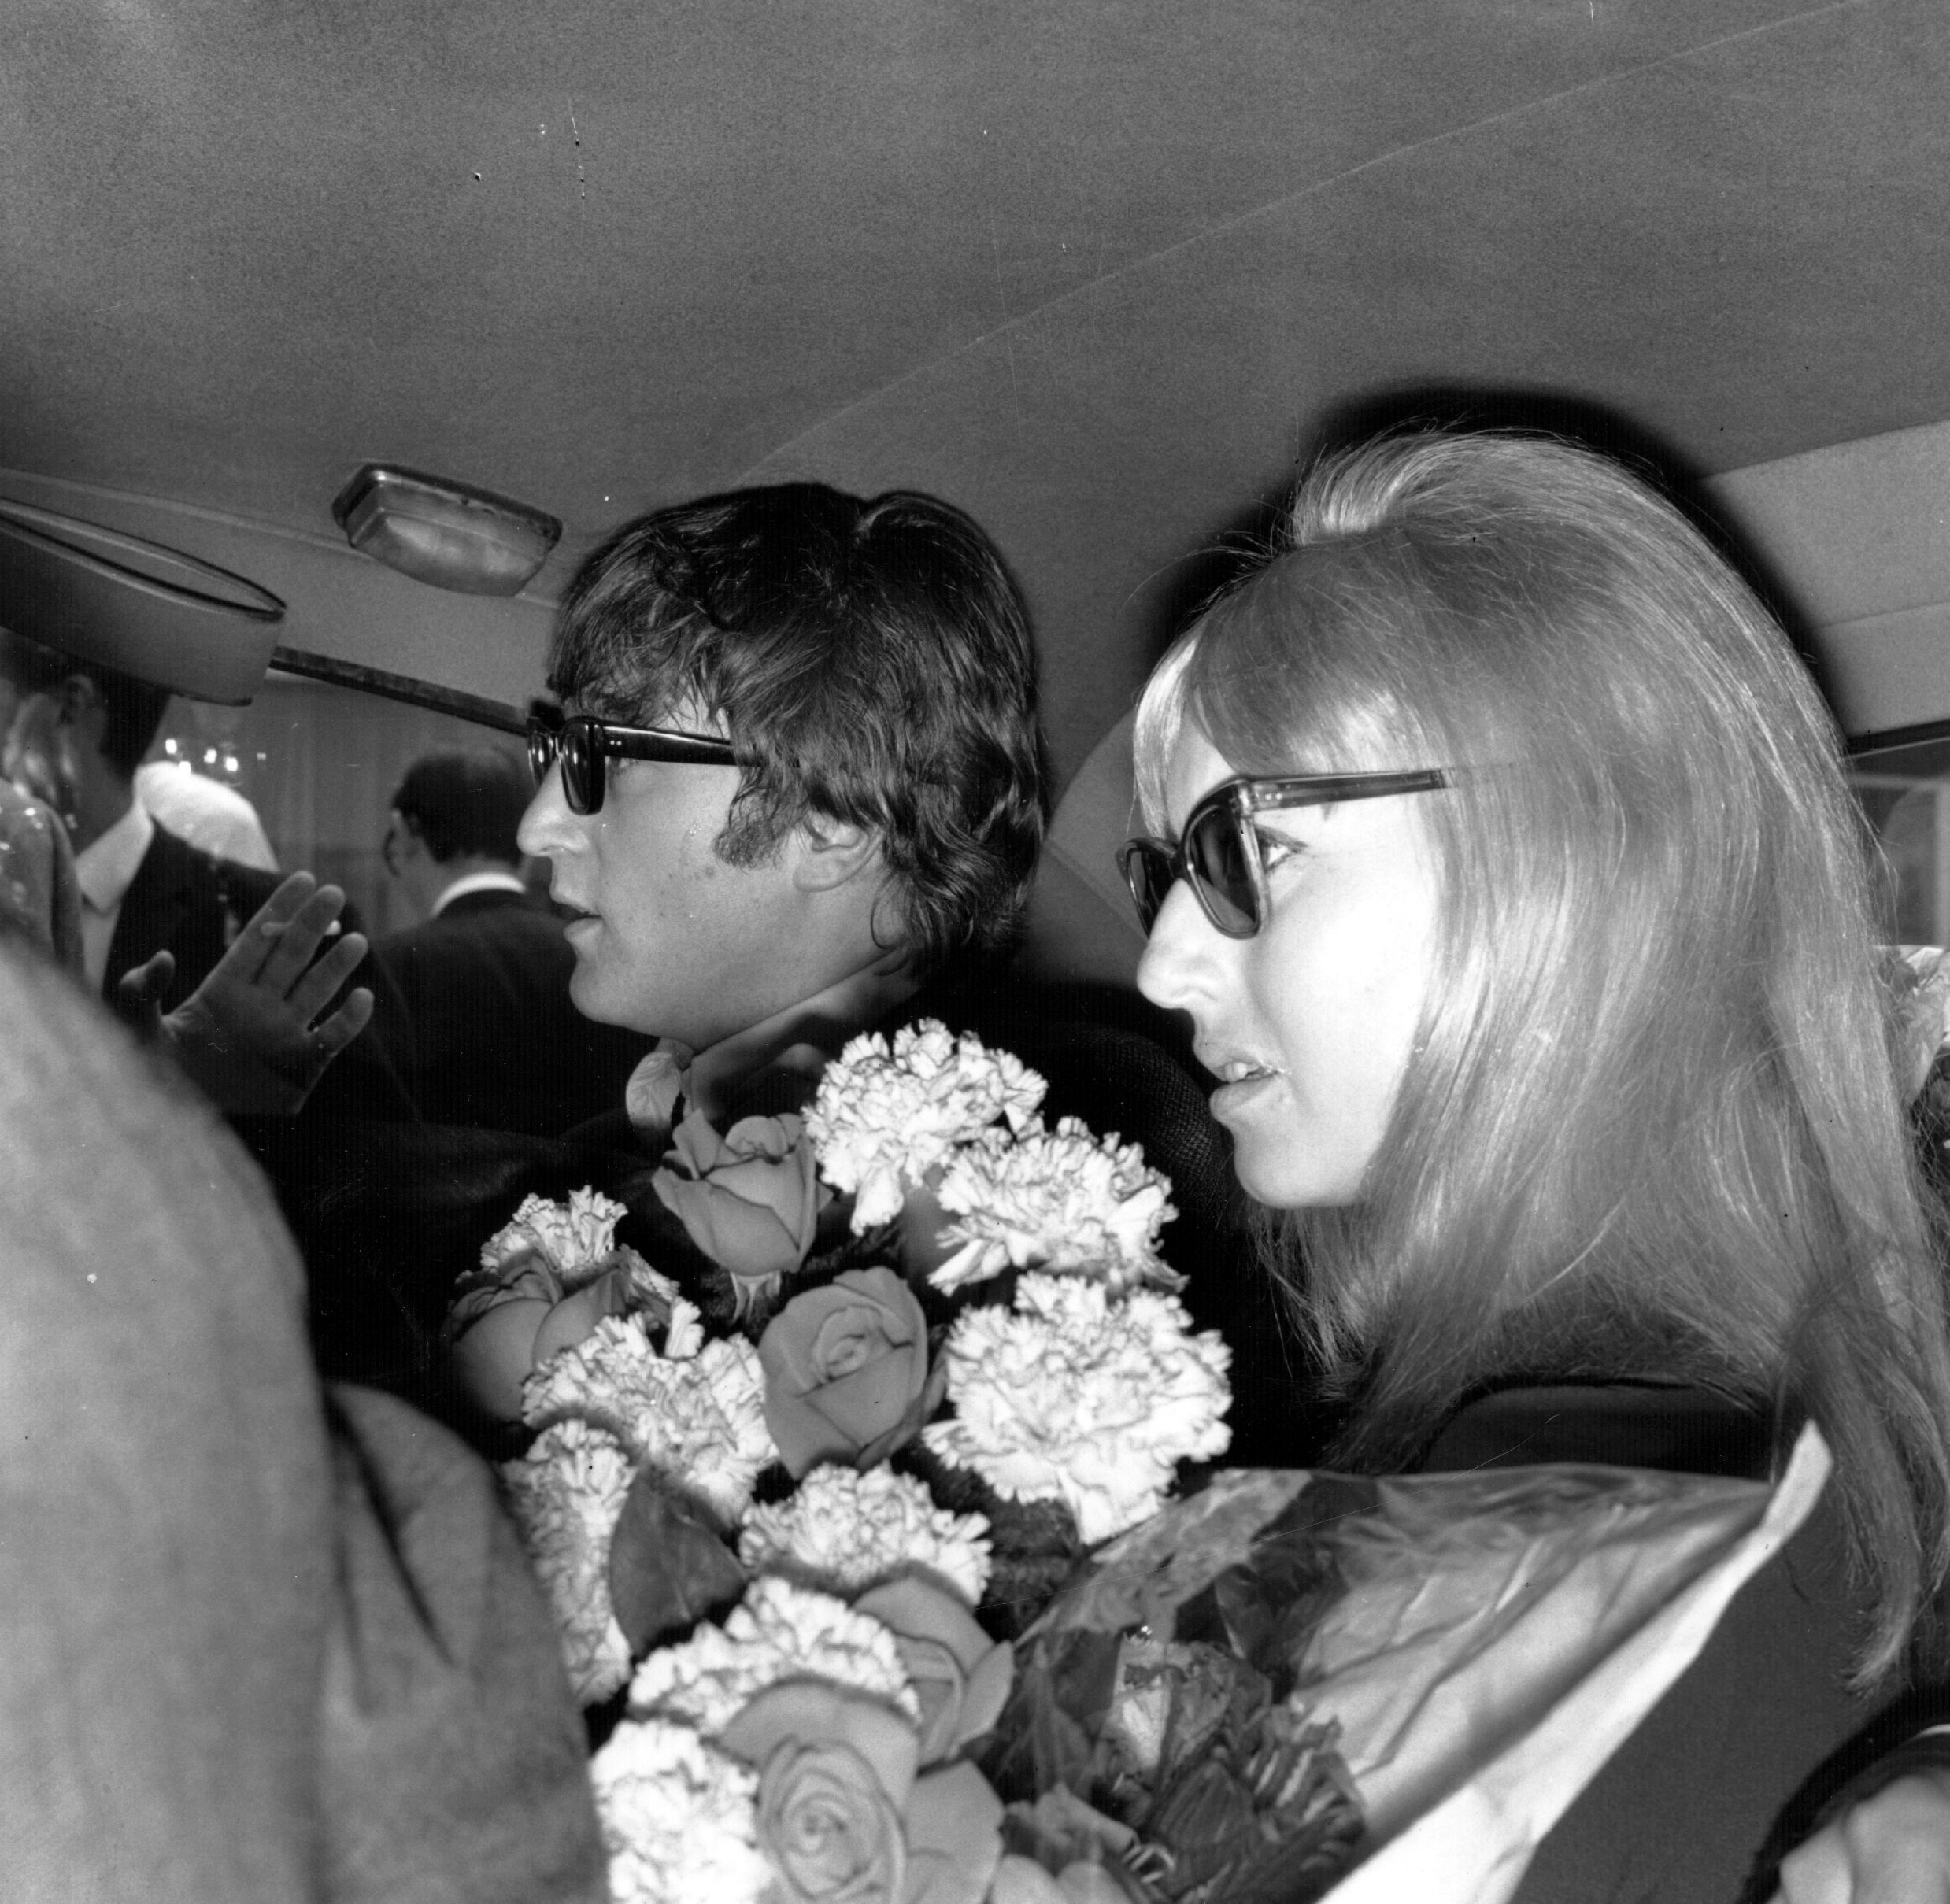 A black and white picture of John and Cynthia Lennon wearing sunglasses in the back seat of a car.